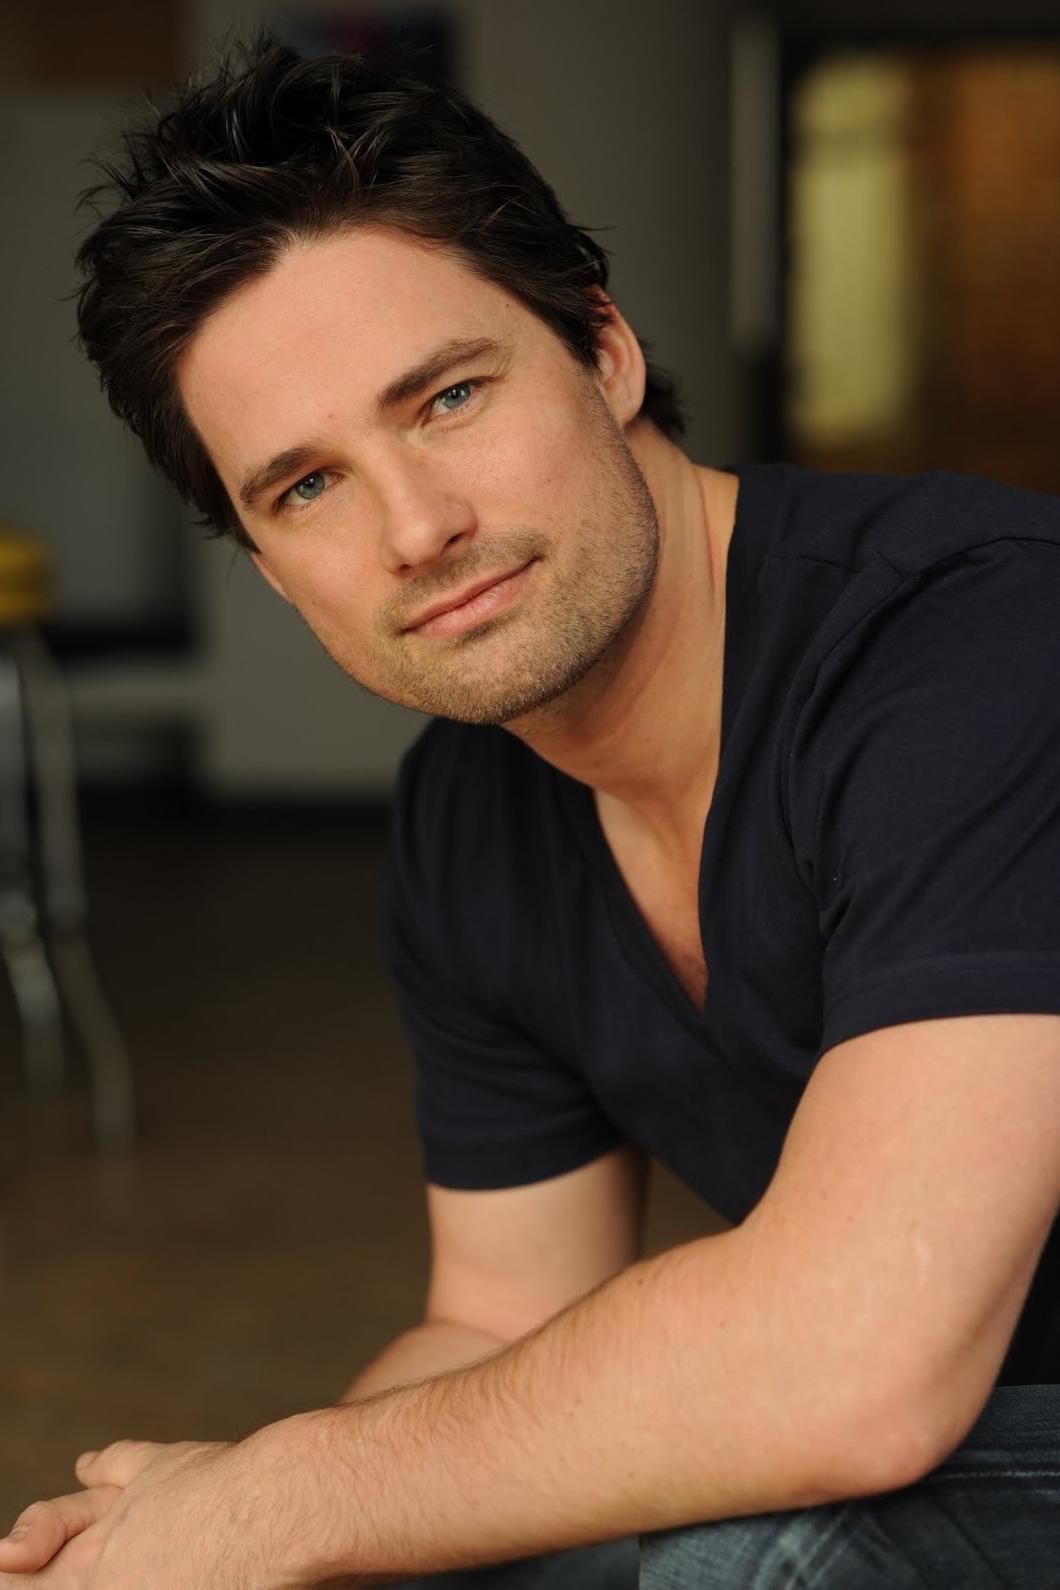 Hans Warren Christie is a British-born Canadian television and film actor known for his roles as Ray Cataldo on the ABC drama October Road and as Aidan &quot; ... - warren_christie